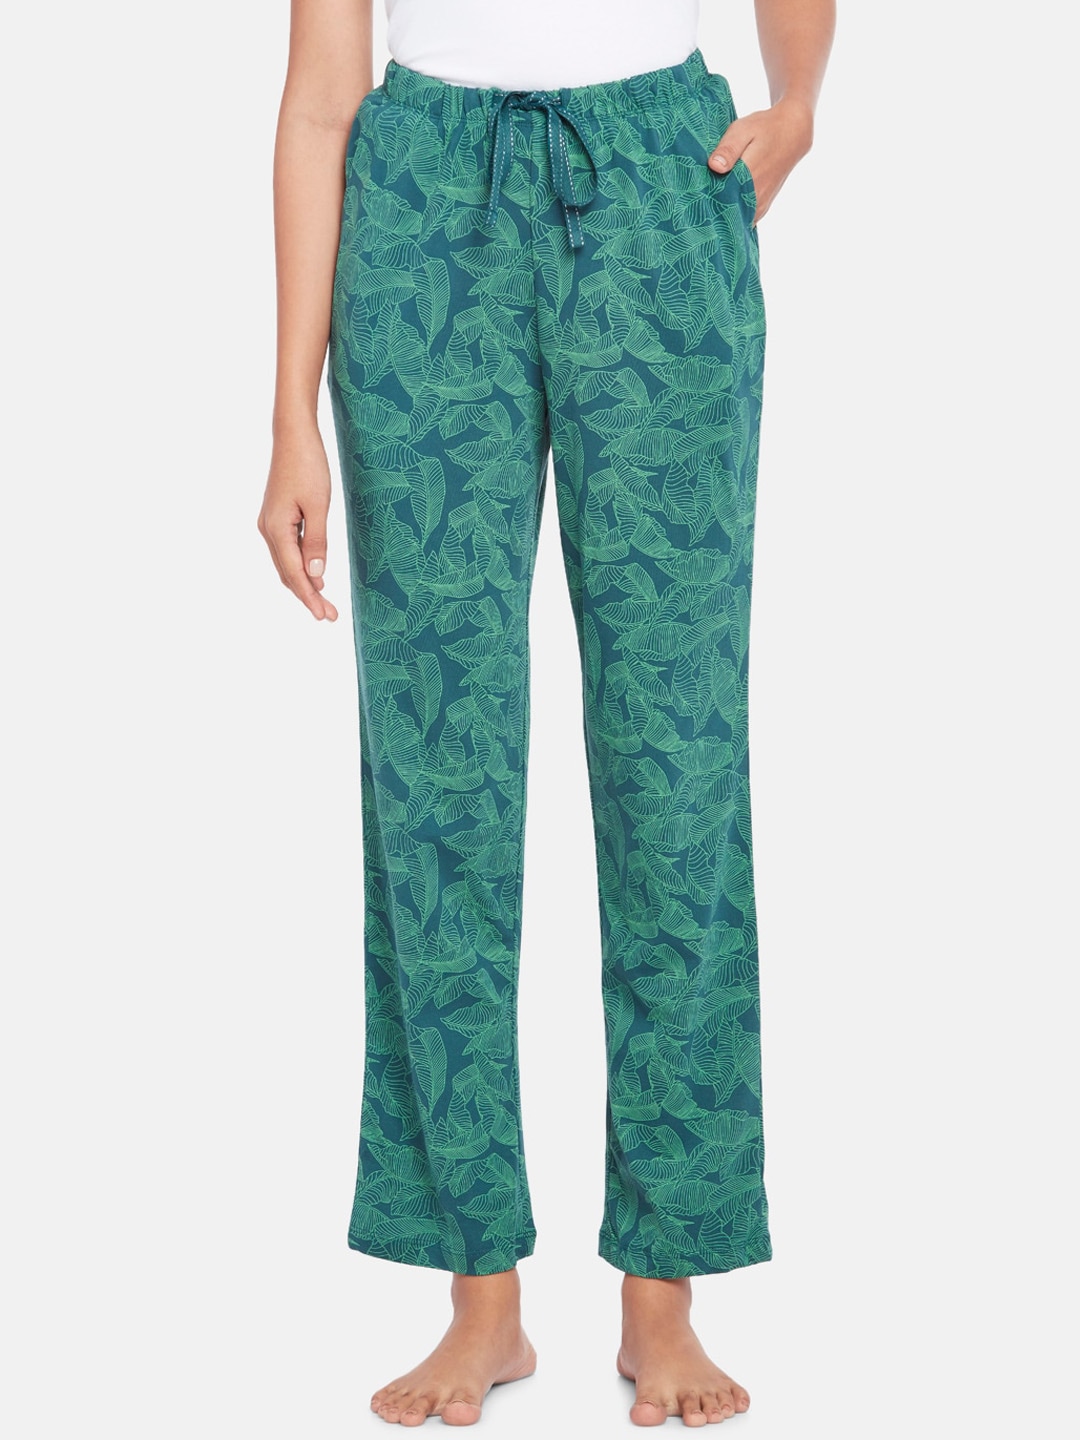 Dreamz by Pantaloons Women Green Printed Pure Cotton Lounge Pants Price in India